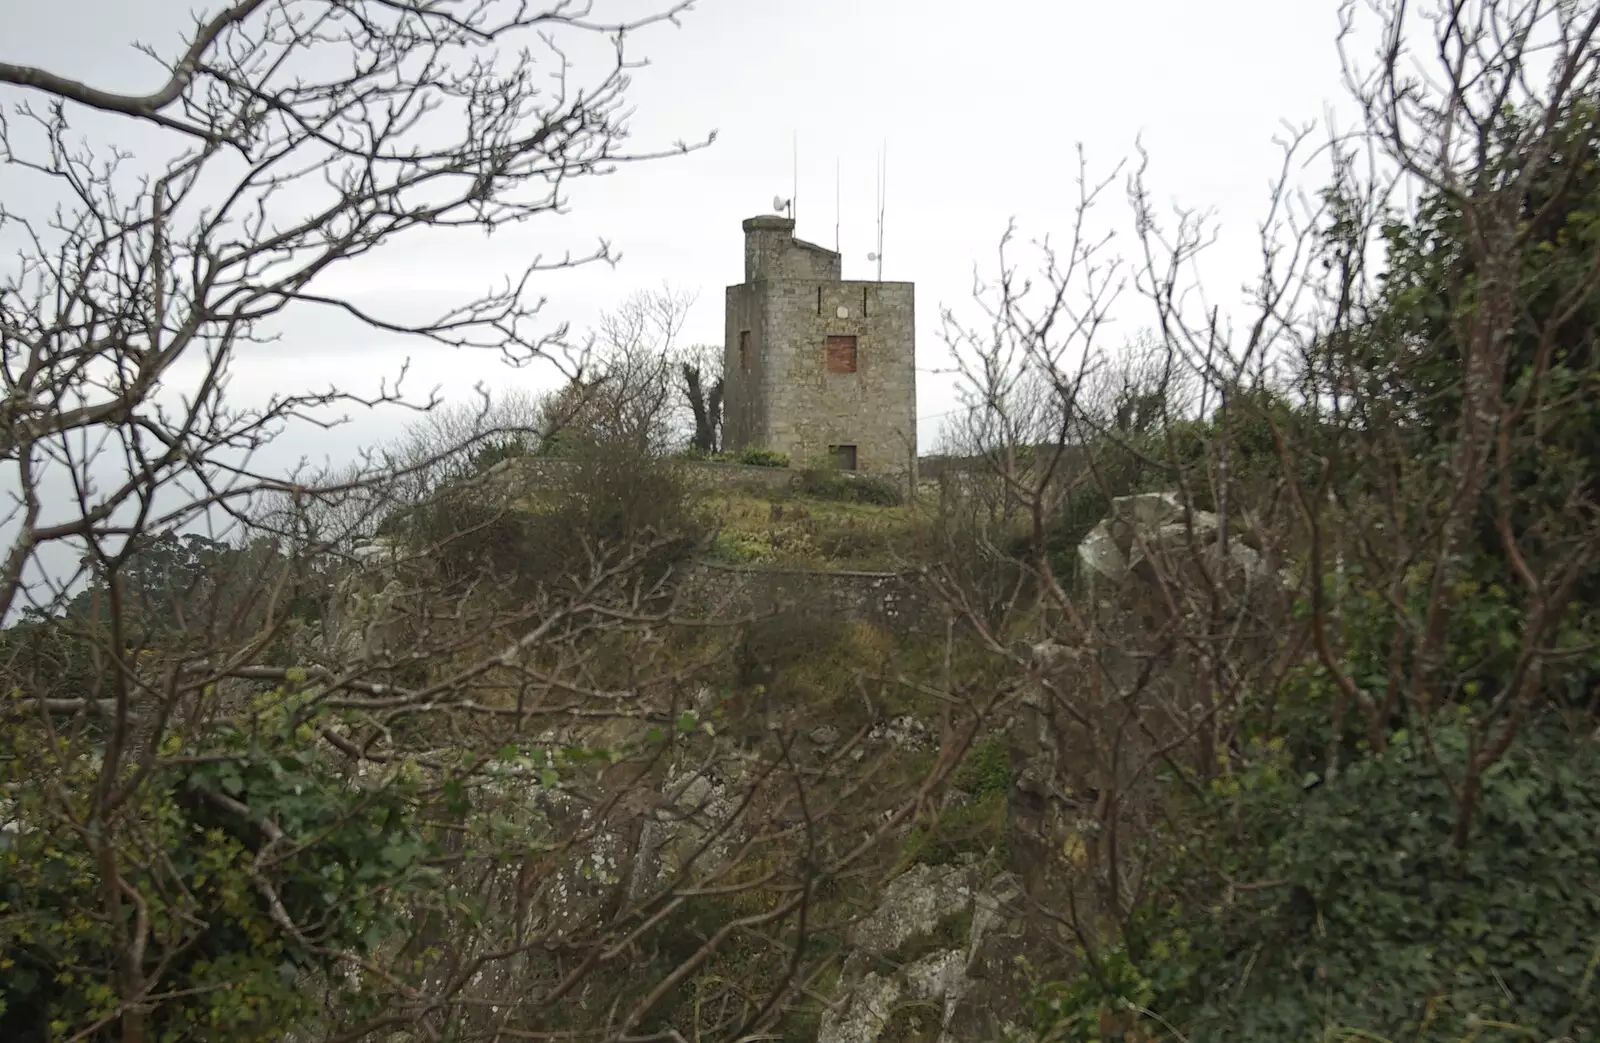 A derelict watch tower, from Apple Pressing, and Isobel's 30th in Blackrock, Dublin, Ireland - 2nd November 2007